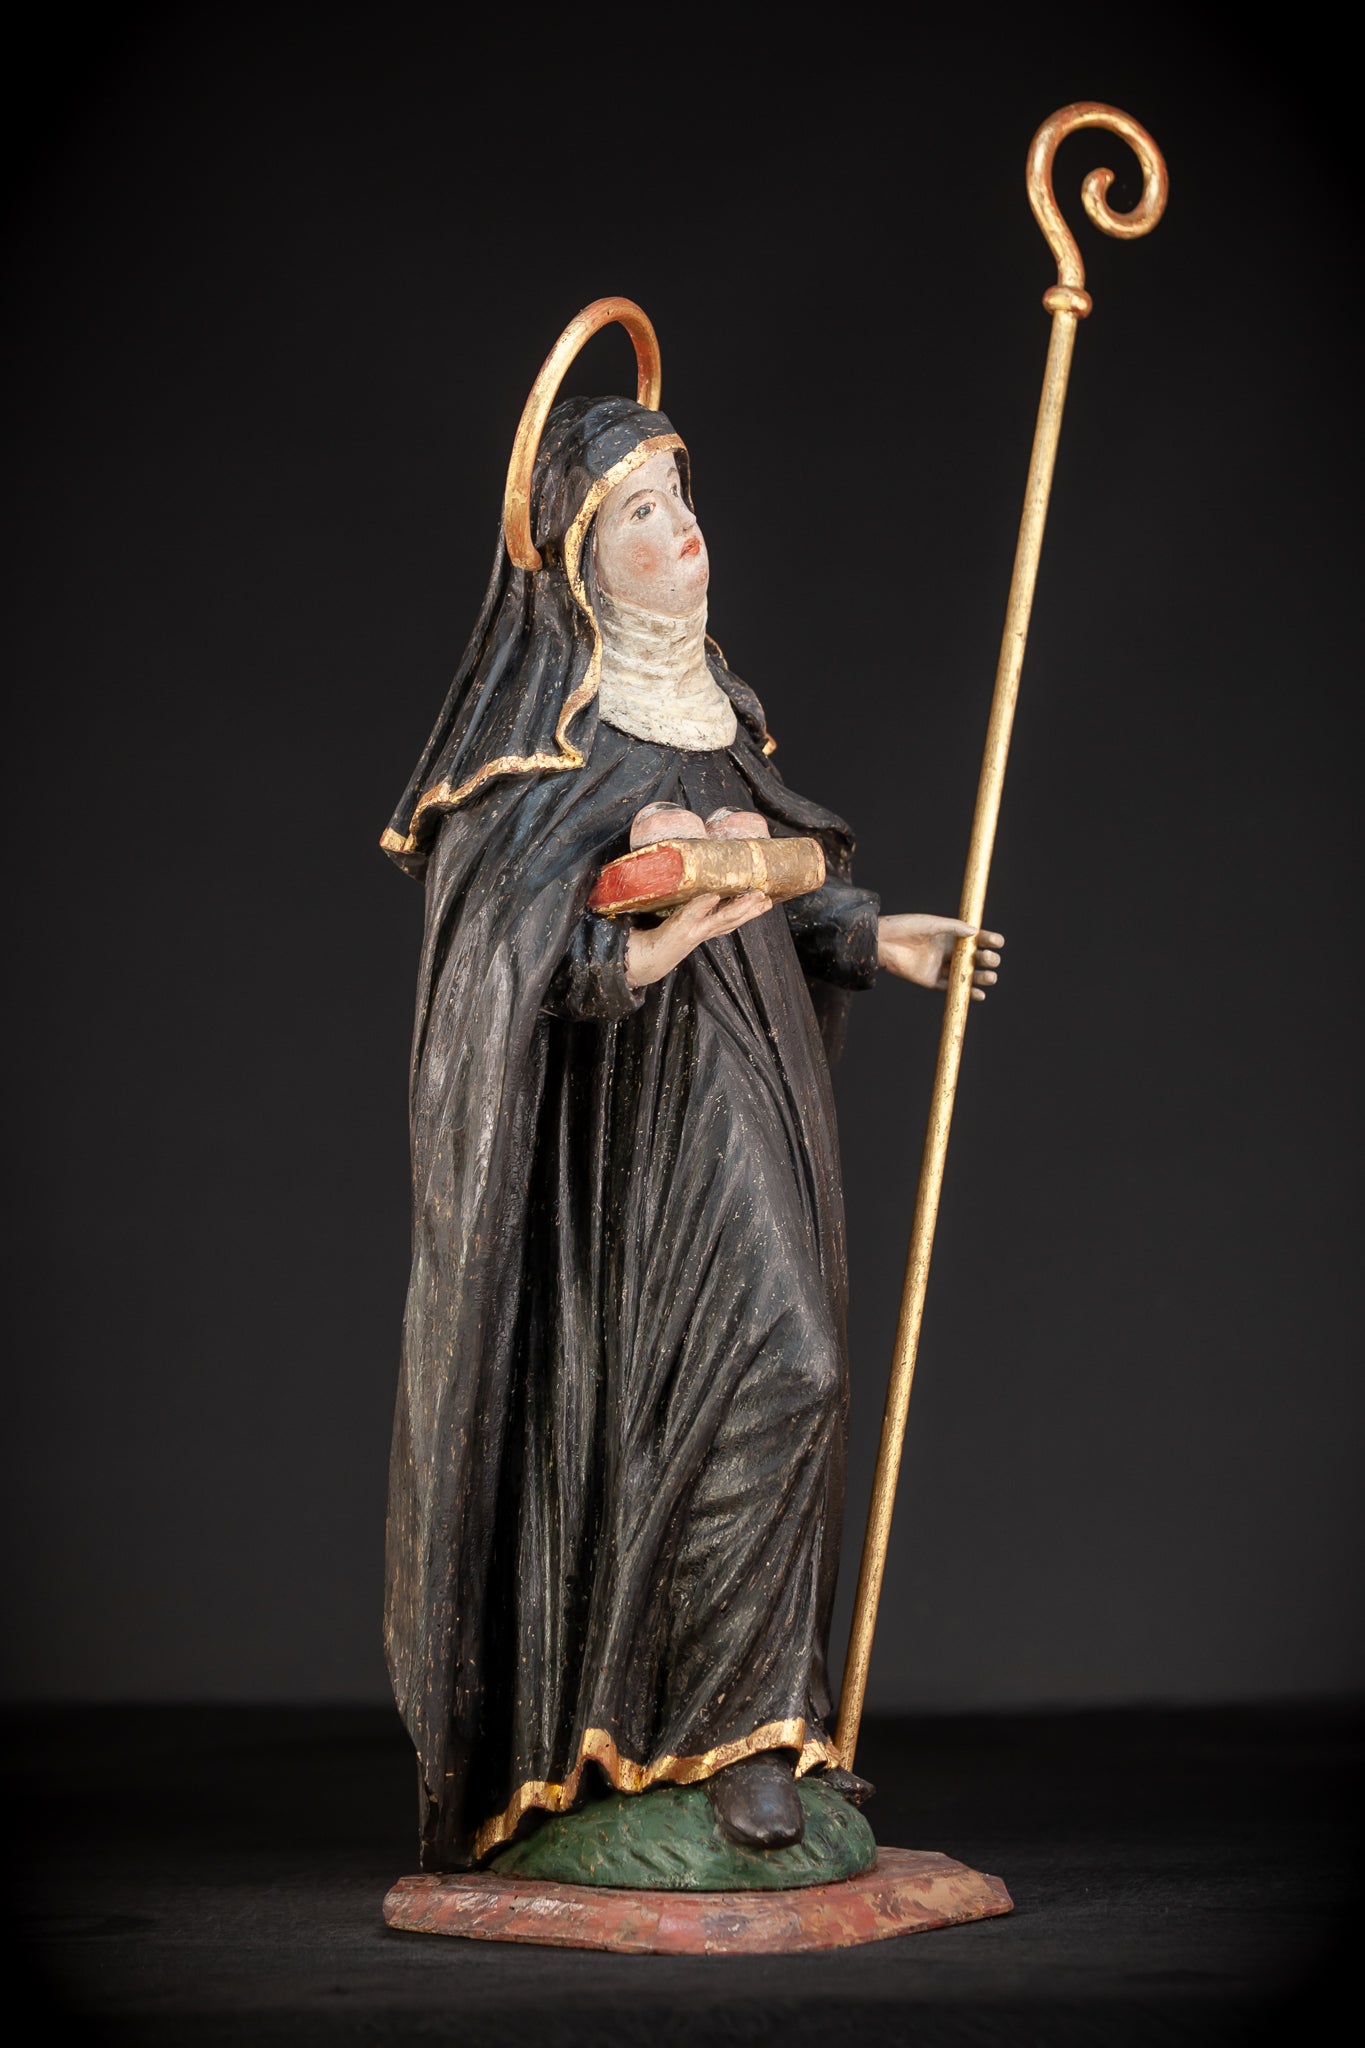 Saint Lucy / Lucia of Syracuse | 1700s Baroque Wood Carving Sculpture | 28.5" / 72.5 cm